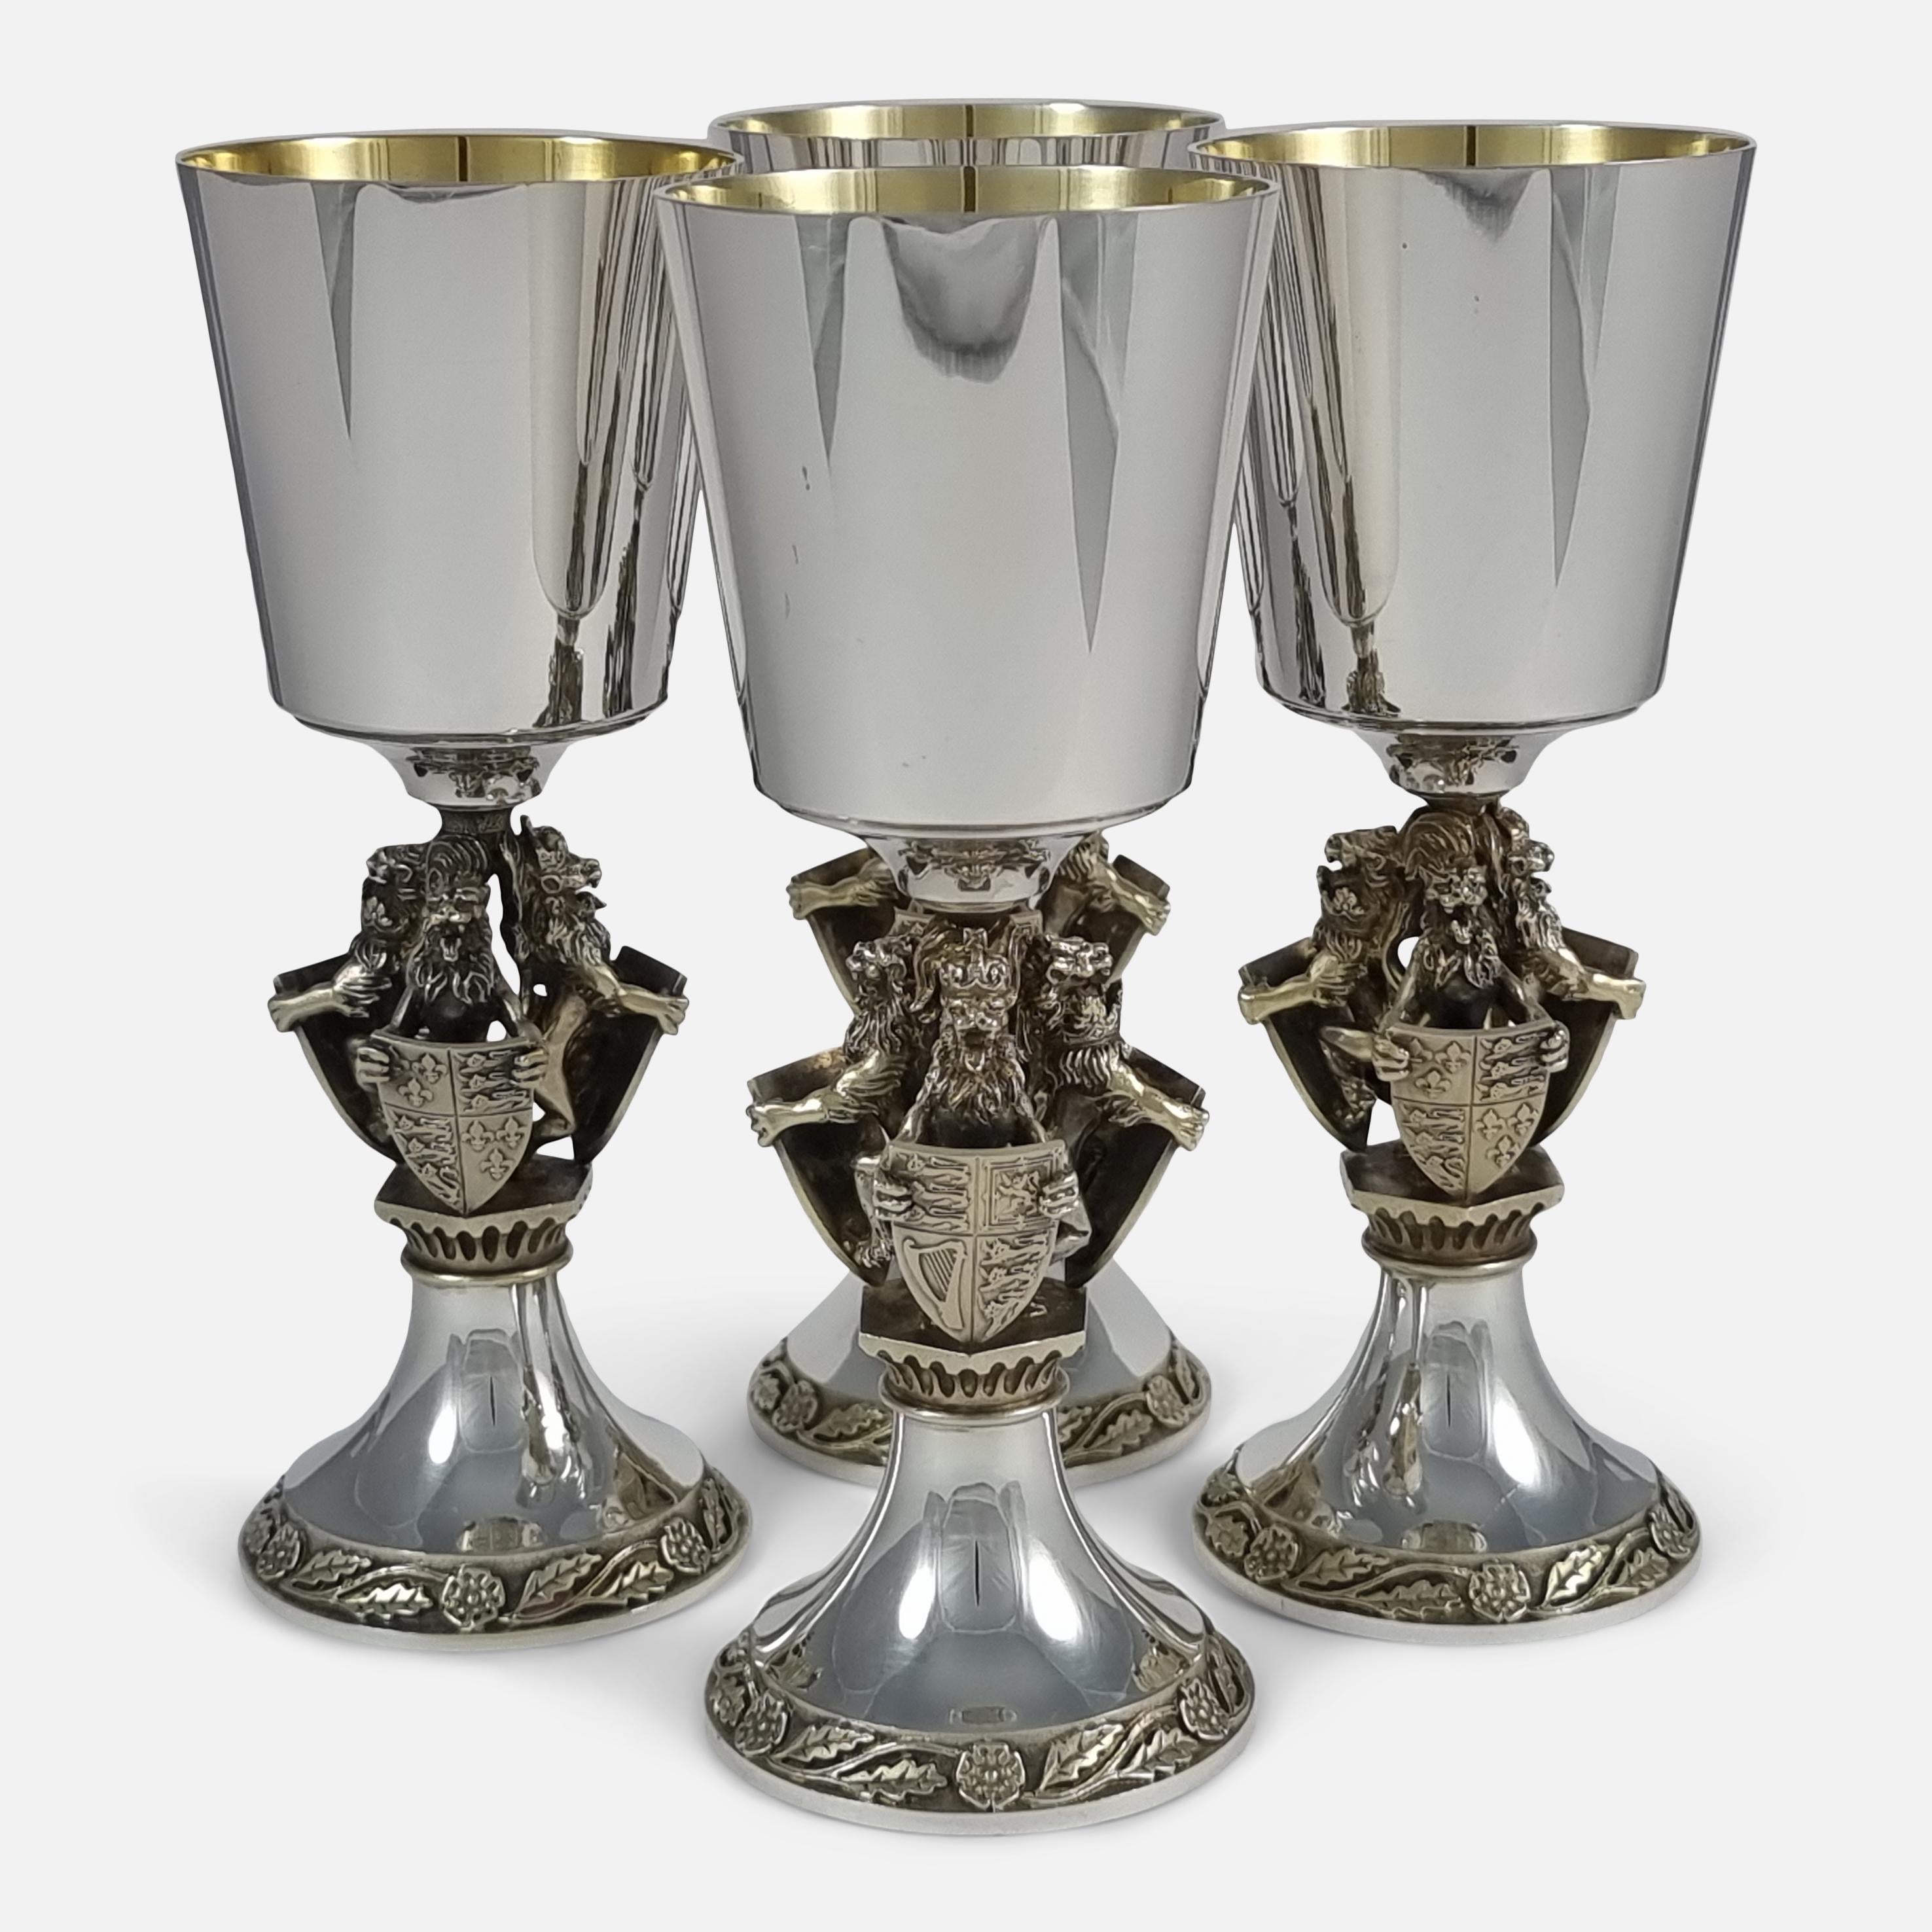 Set of Four Aurum Silver Gilt 'College of Arms' Goblets, Hector Miller, 1984 For Sale 12